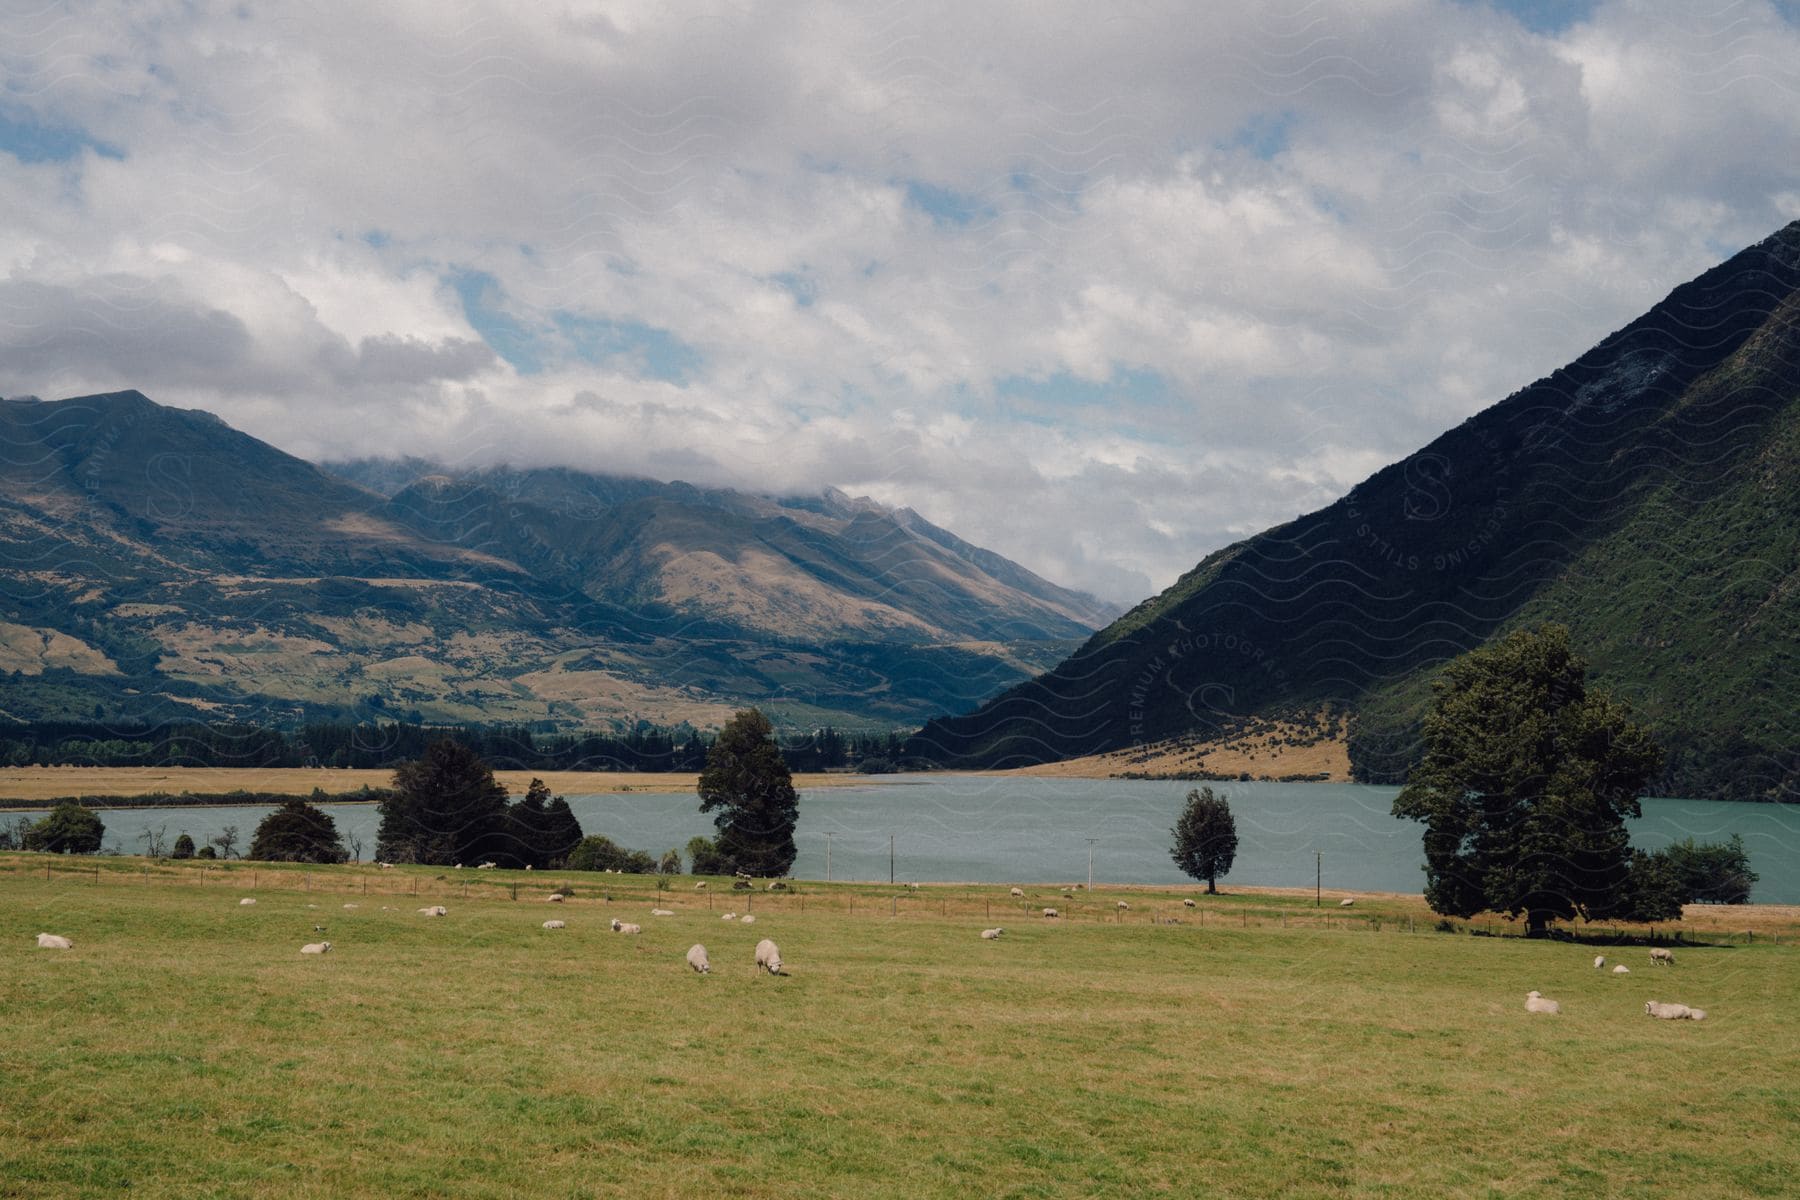 Sheep grazing in a green field with a backdrop of mountains and a lake under a cloudy sky.